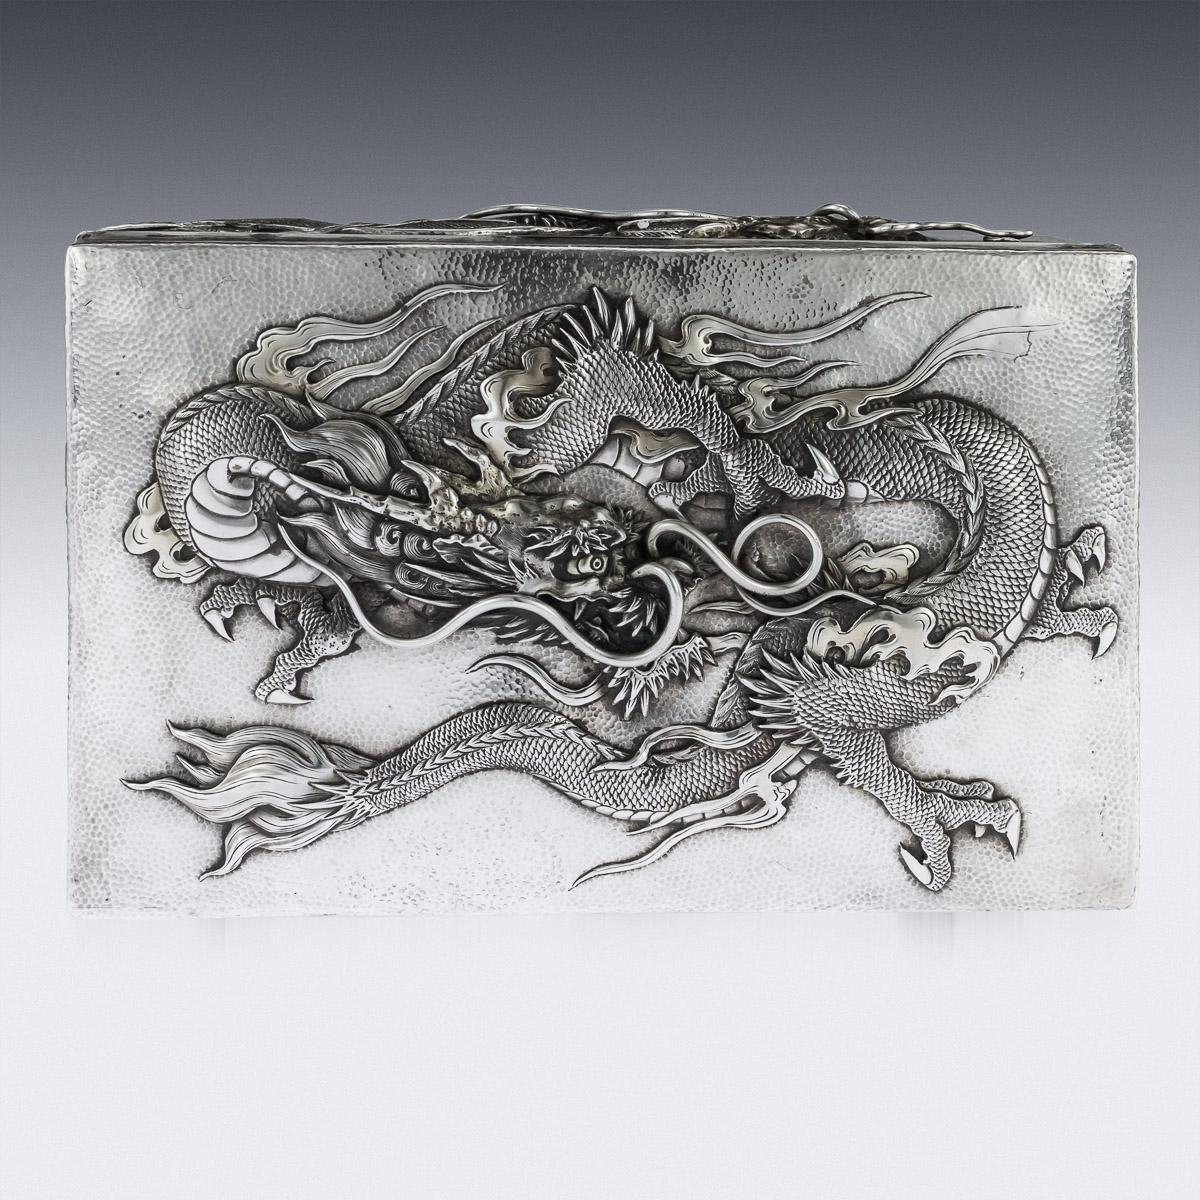 Antique early-20th century Japanese Meiji period solid silver box, double skinned body, sides and lid are embossed in high-relief with dragons and applied with flowing whiskers on hand hammered ground, dark wood lined base and interior. Hallmarked